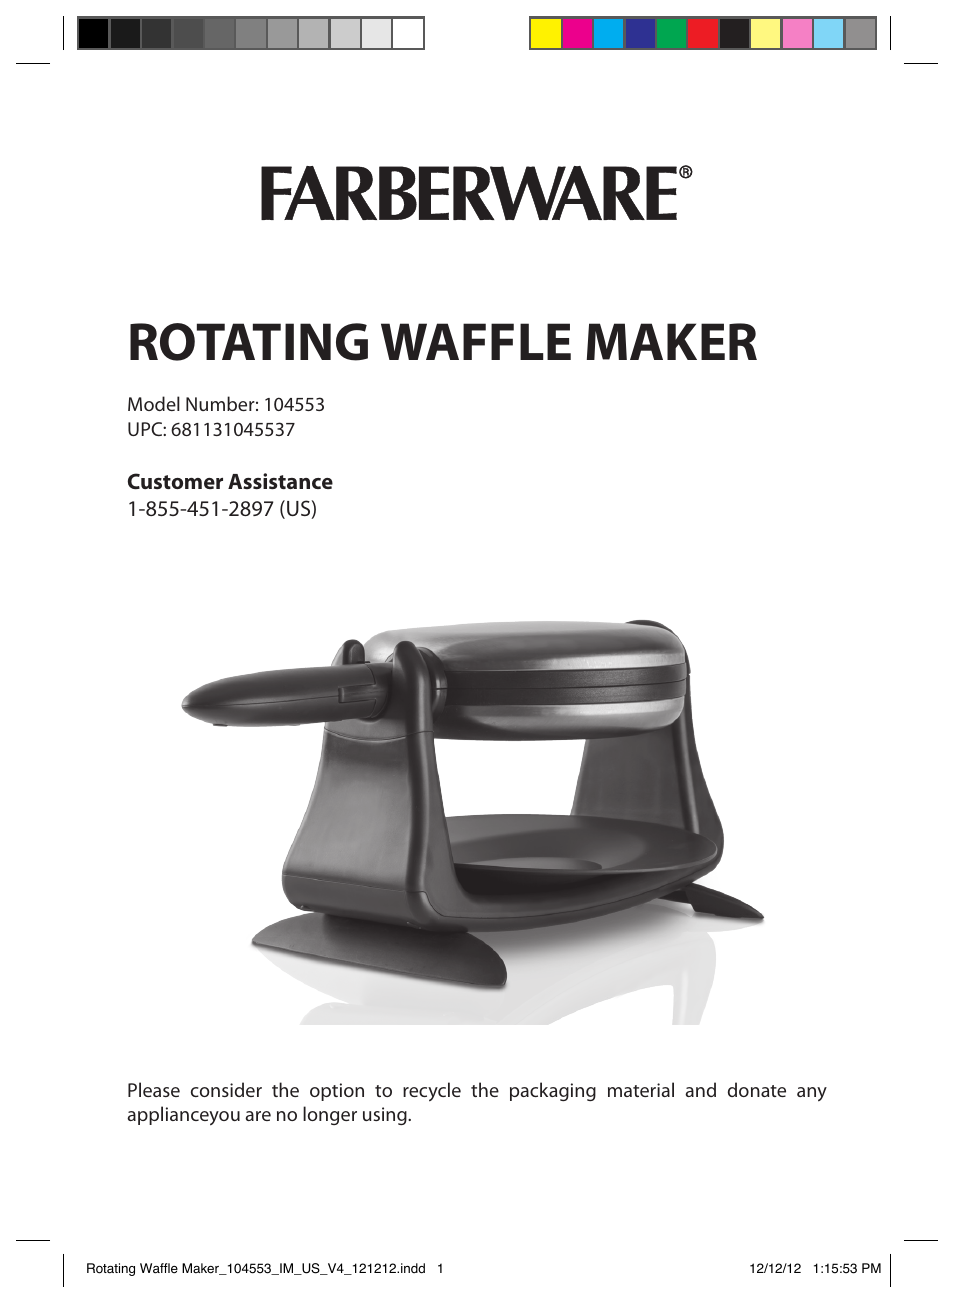 FARBERWARE 104553 Non-stick Flip Waffle Maker User Manual | 11 pages